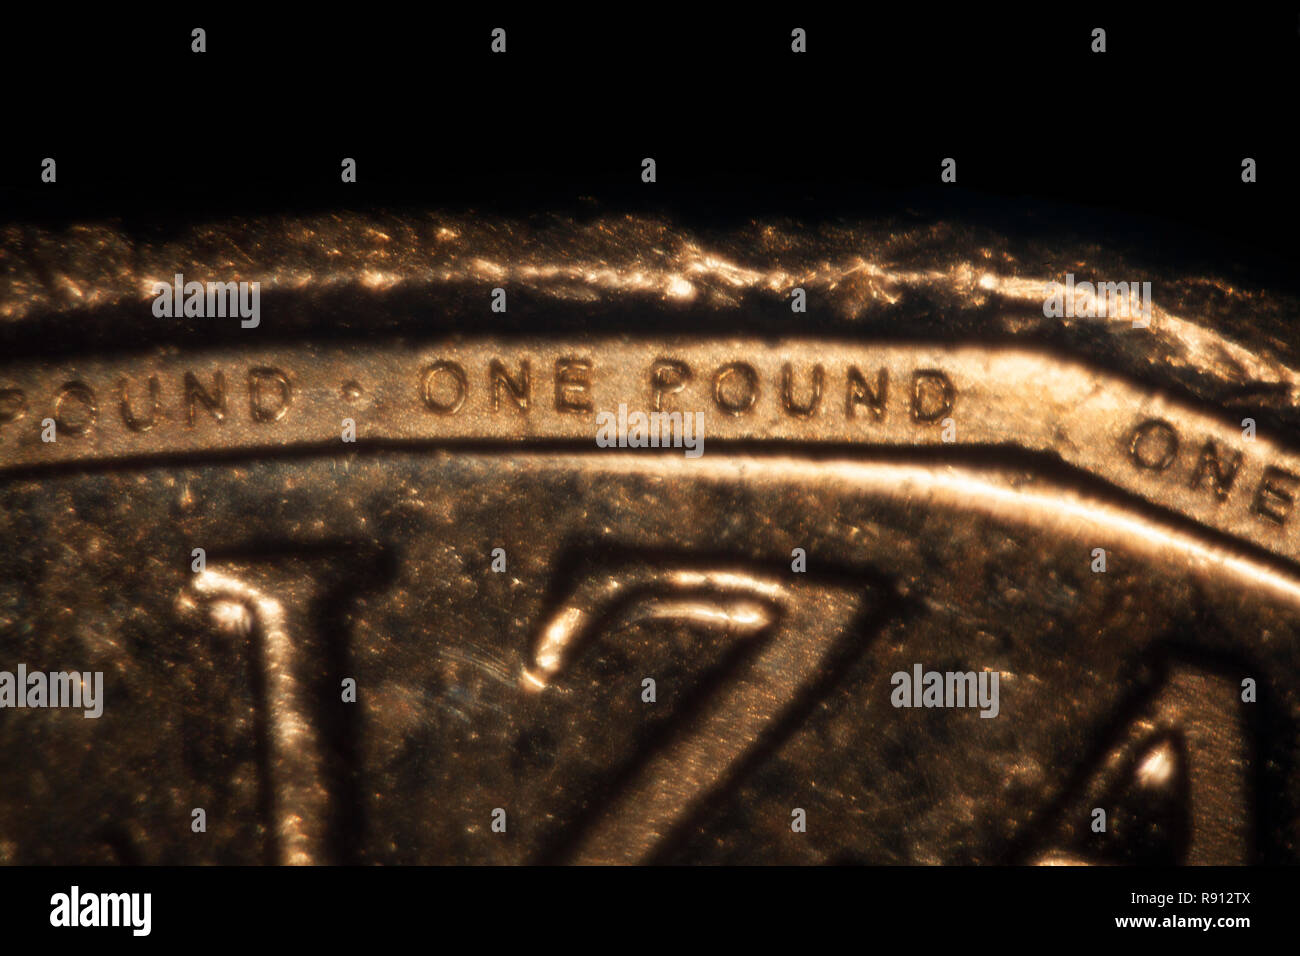 High macro view of one pound coin detail, United Kingdom, Great Britain currency Stock Photo